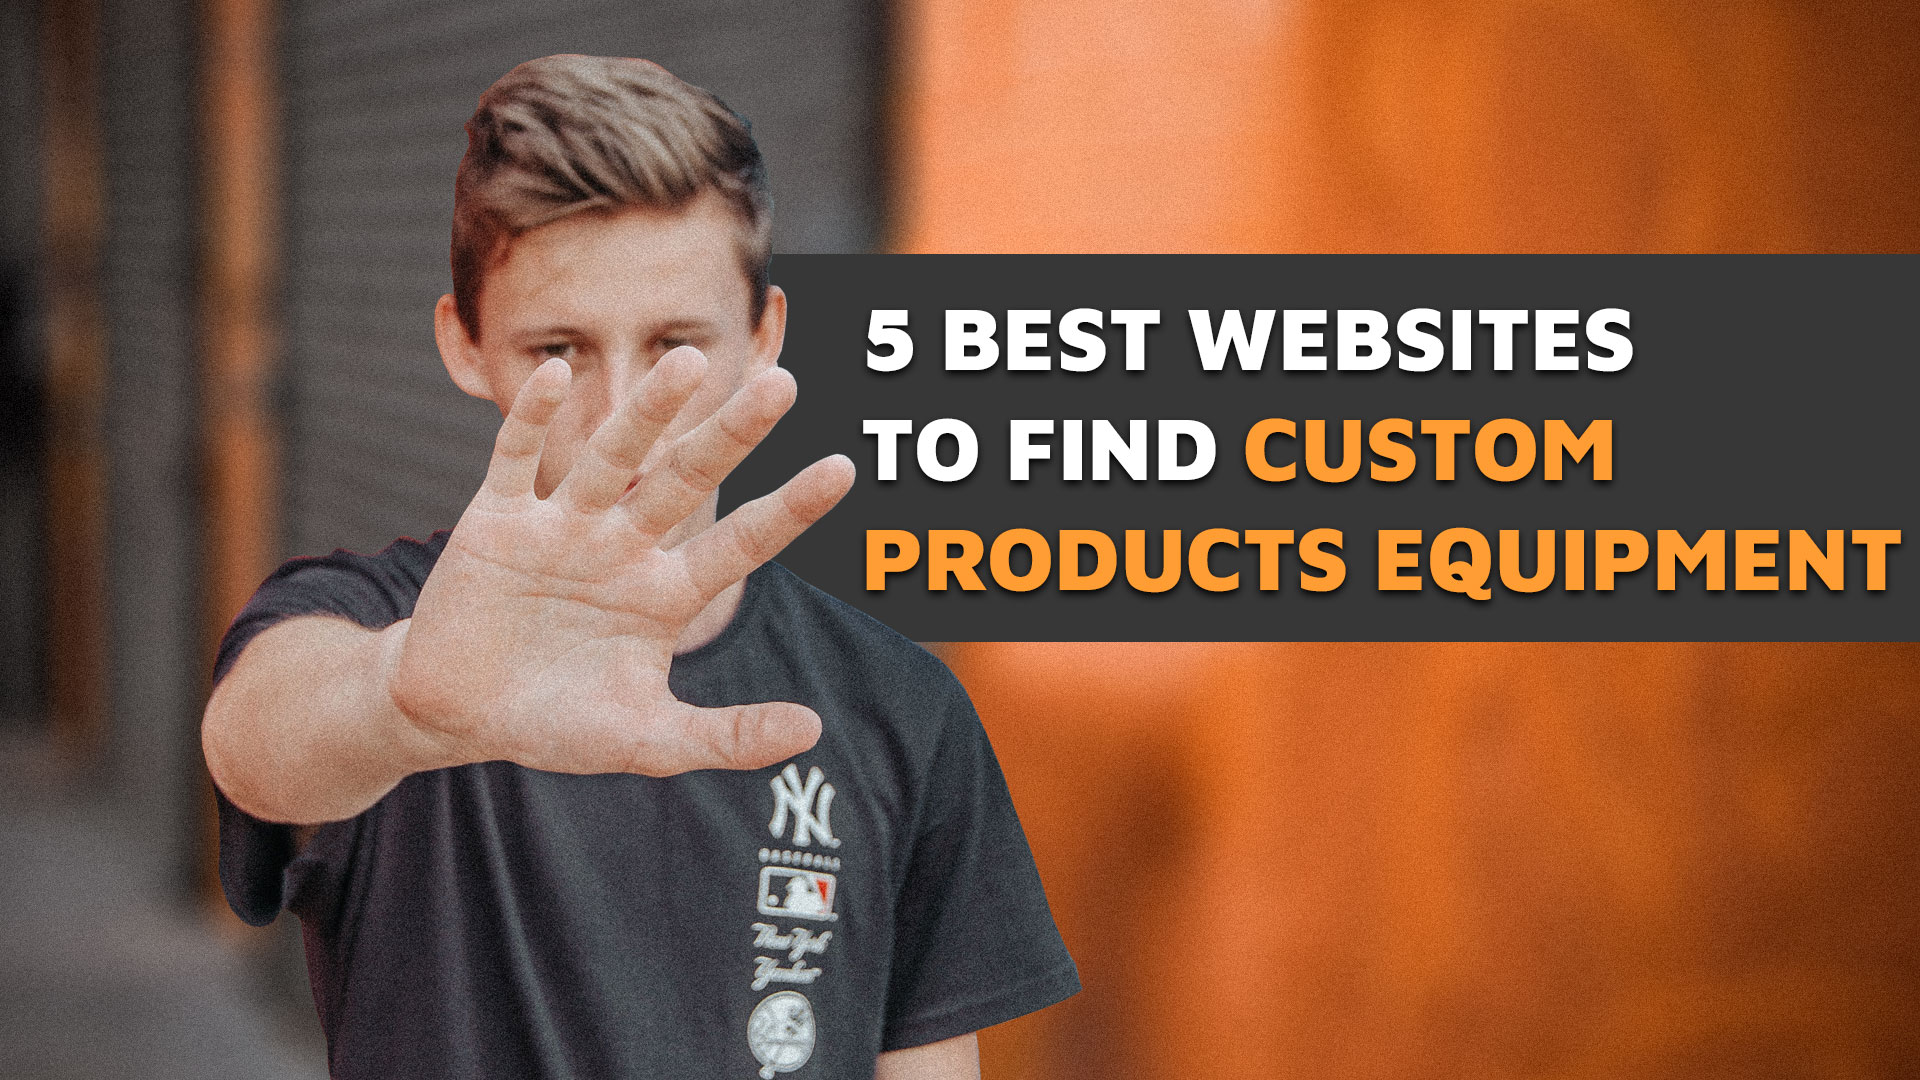 5 Best Websites to Find Custom Products Equipment